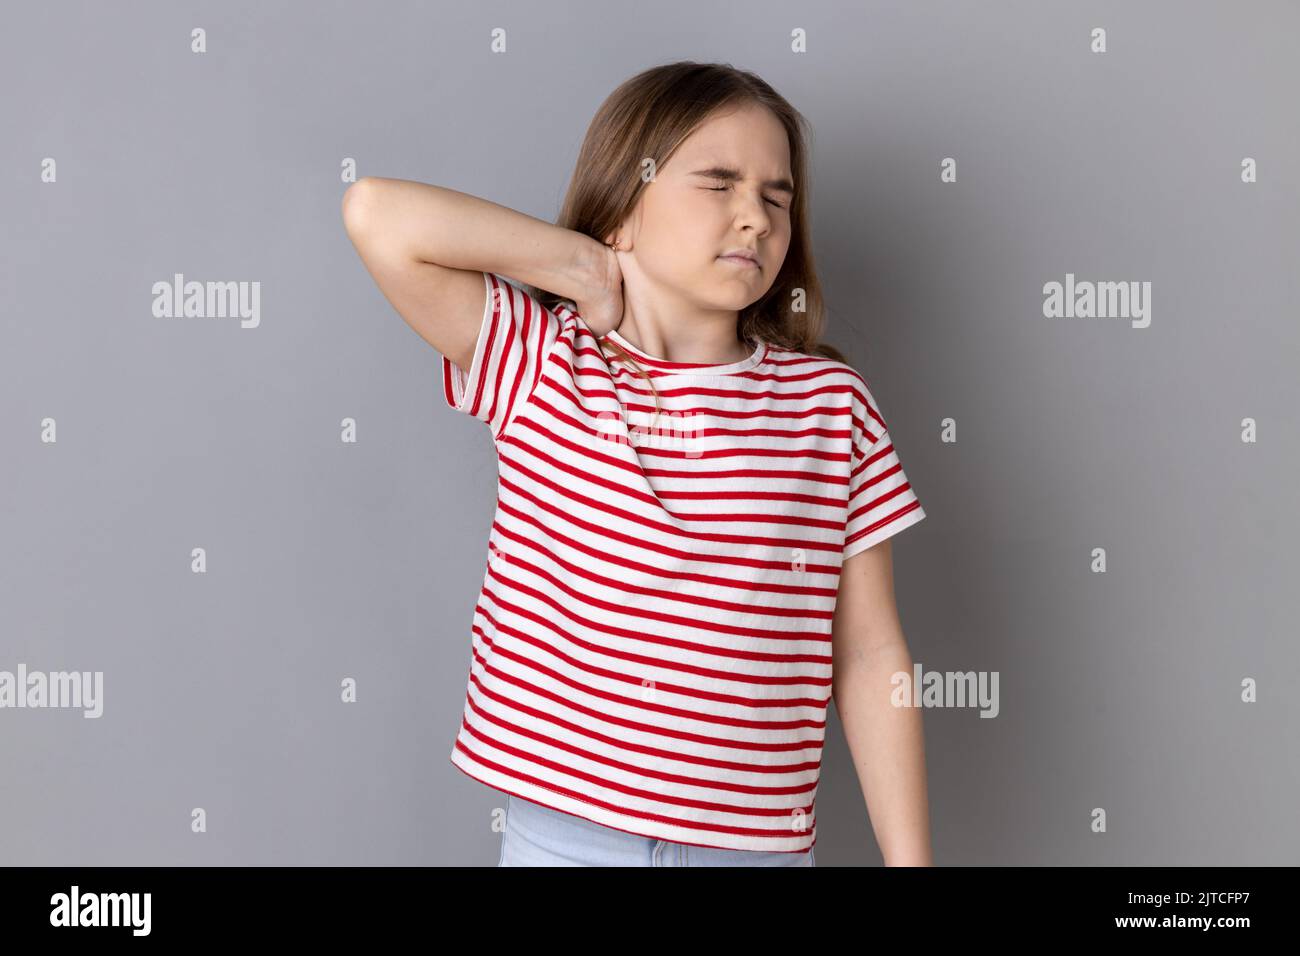 Portrait of unhealthy sick dark haired little girl wearing striped T-shirt standing massaging neck to relieve pain, muscle strain in back. Indoor studio shot isolated on gray background. Stock Photo